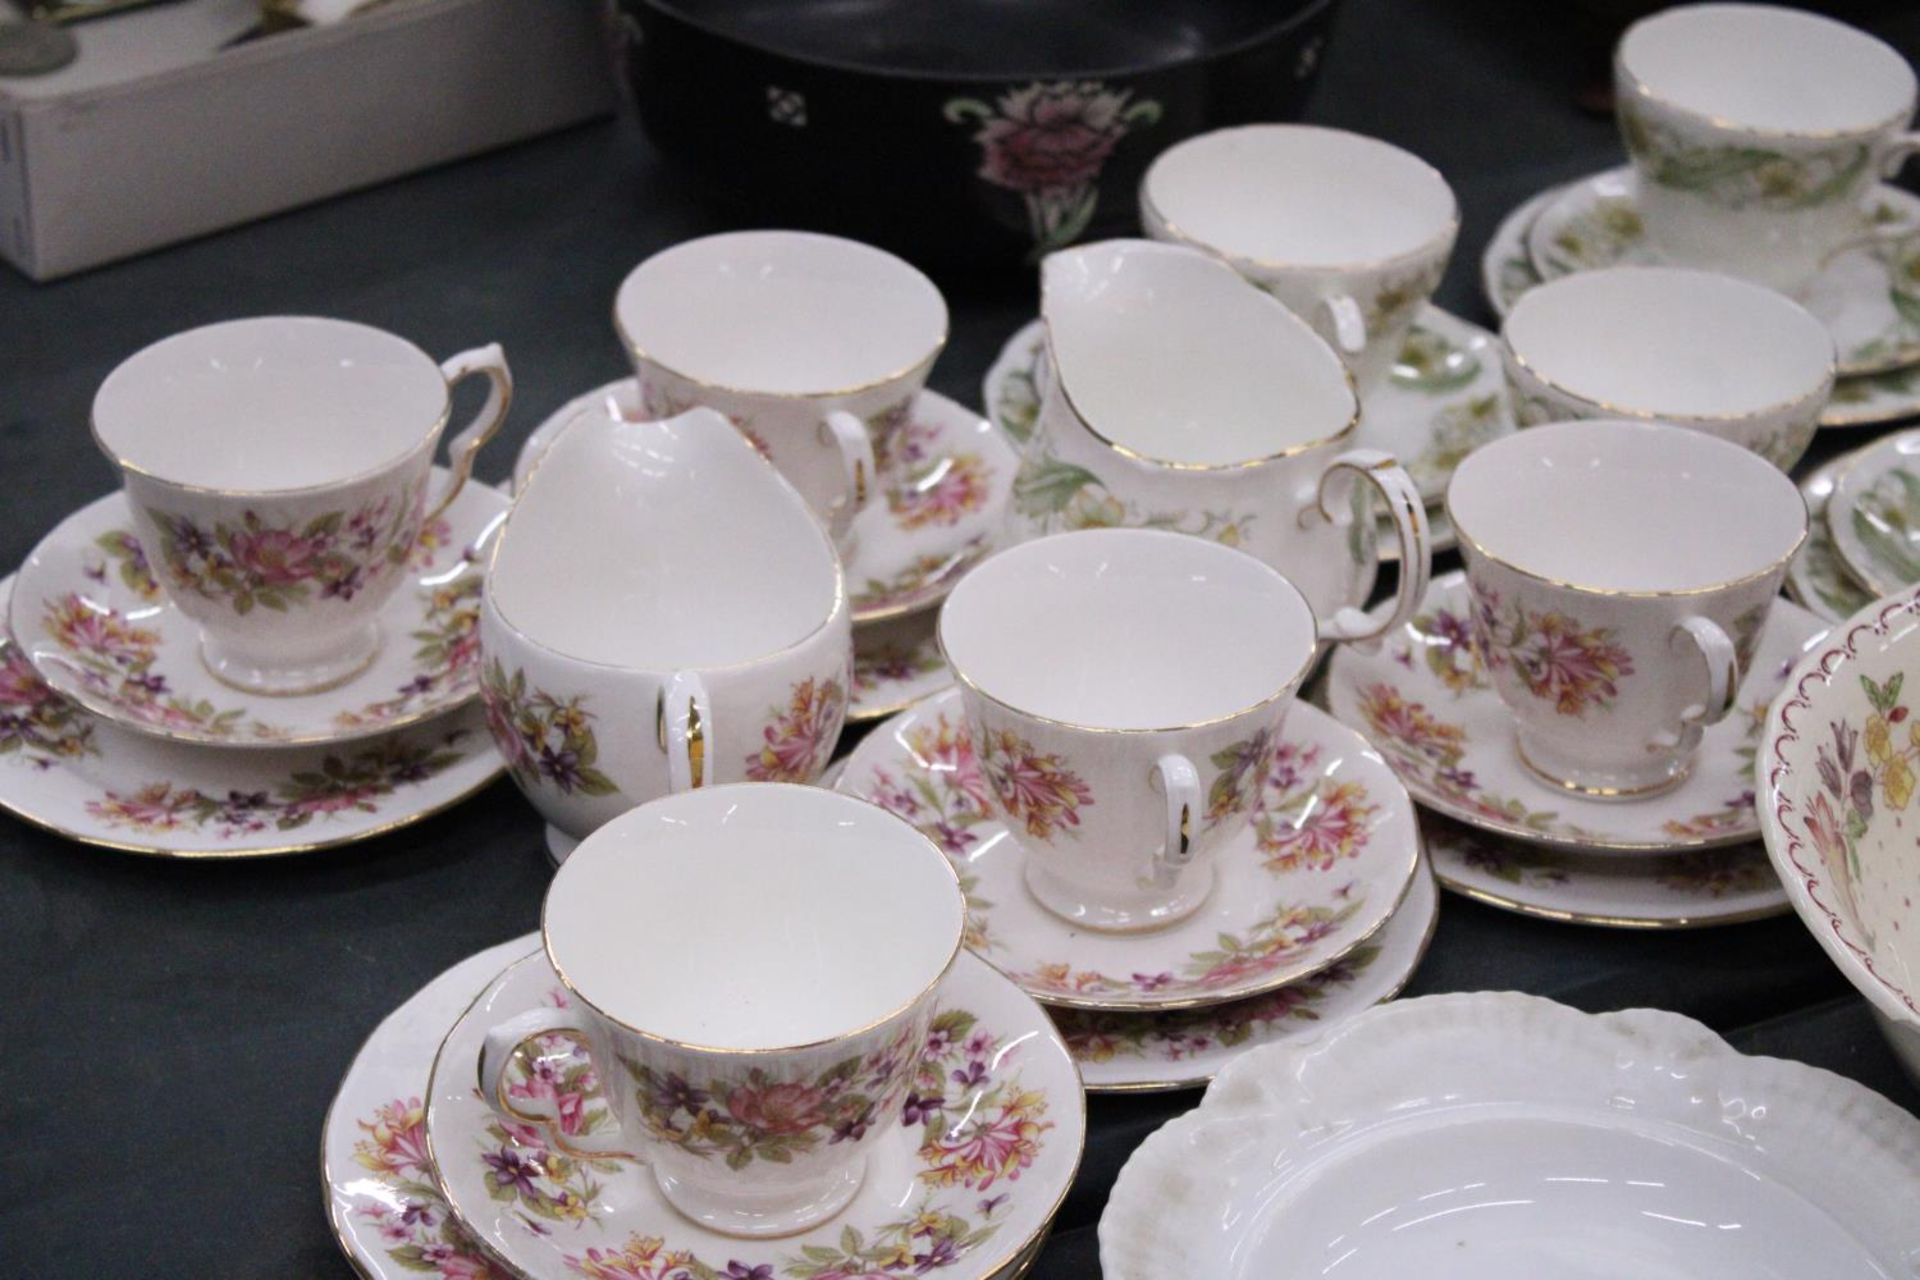 A QUANTITY OF CHINA CUPS, SAUCERS, SIDE PLATES AND CREAM JUGS BY COLCLOUGH AND DUCHESS - Image 5 of 6